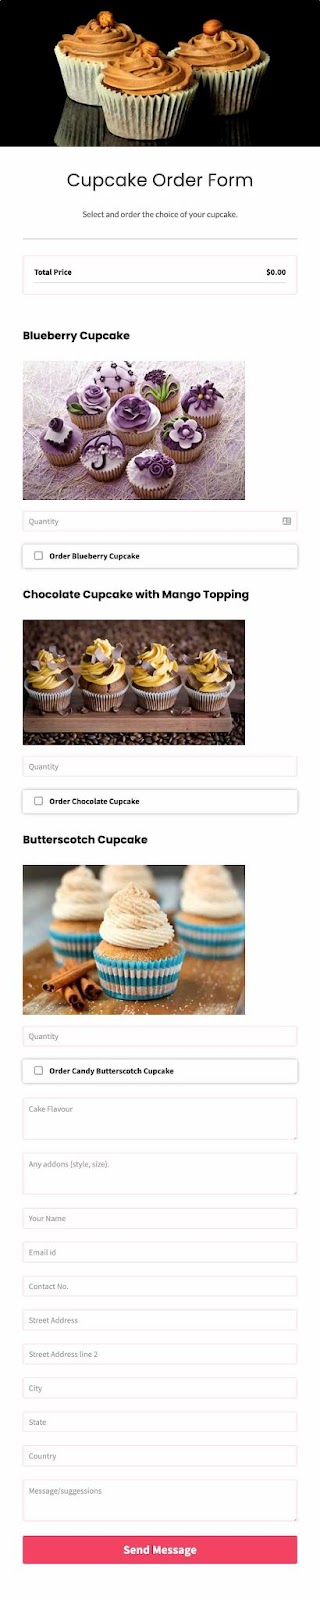 order form example: cupcakes